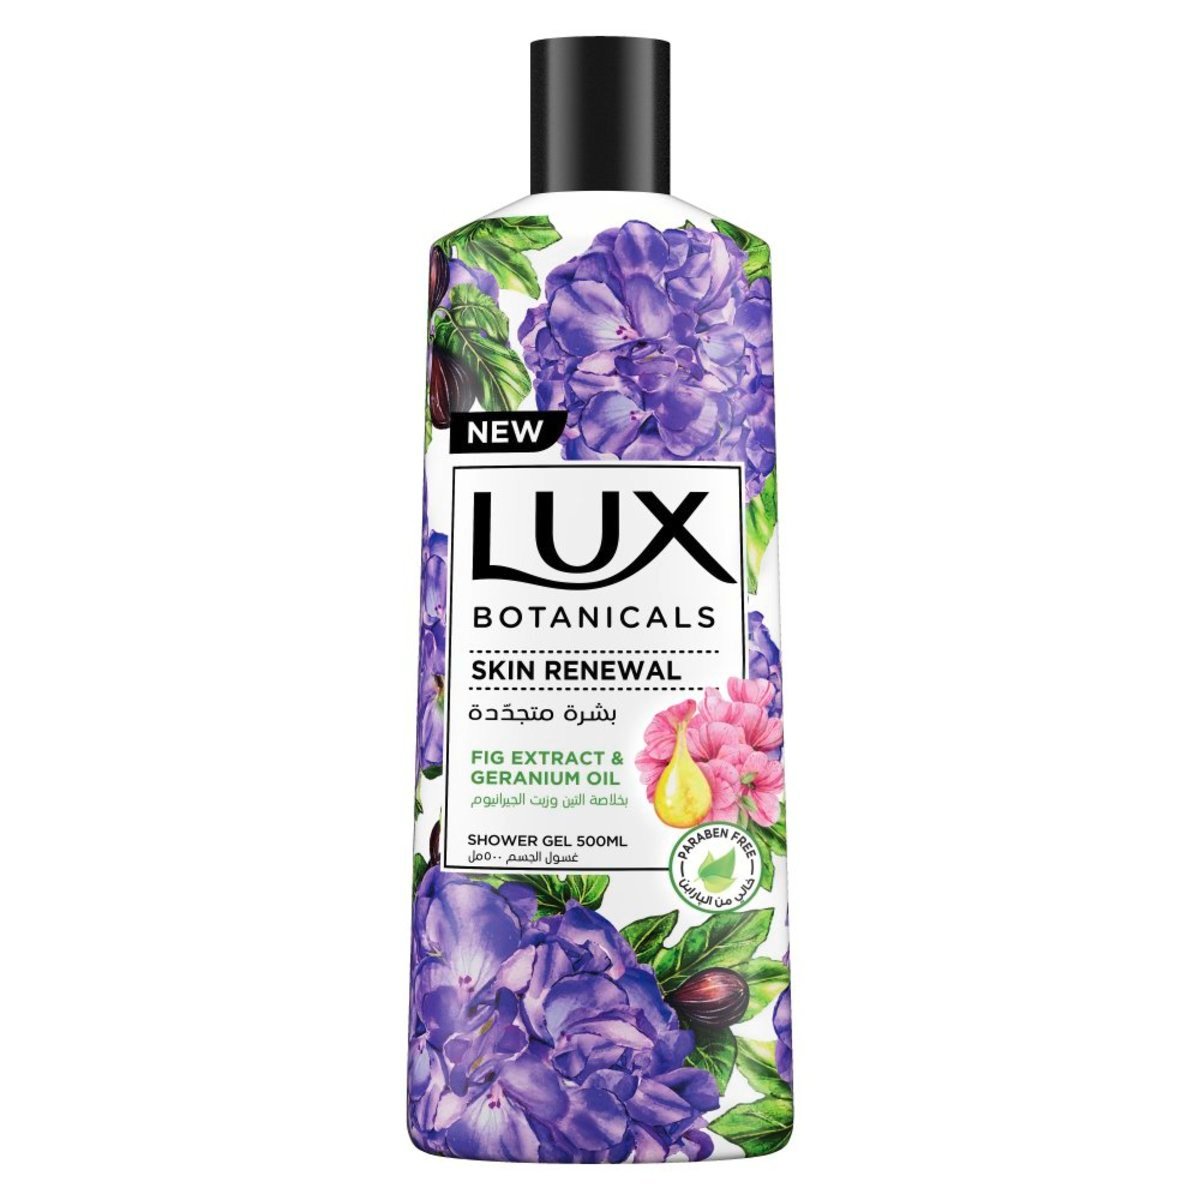 Lux Botanicals Skin Renewal Body Wash Fig Extract And Geranium Oil 500 ml